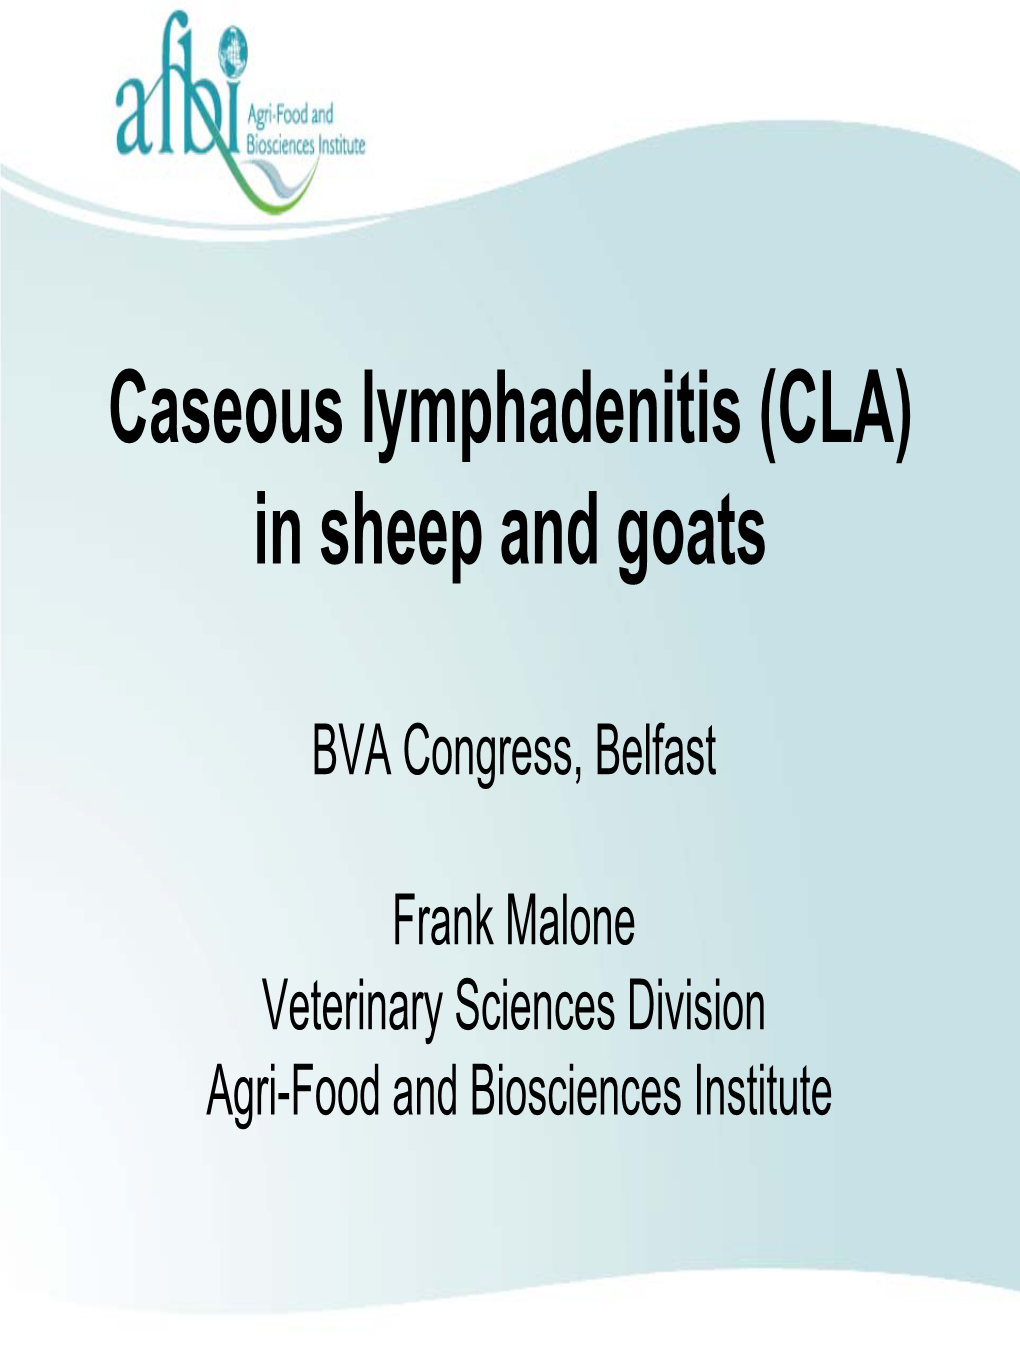 Caseous Lymphadenitis (CLA) in Sheep and Goats